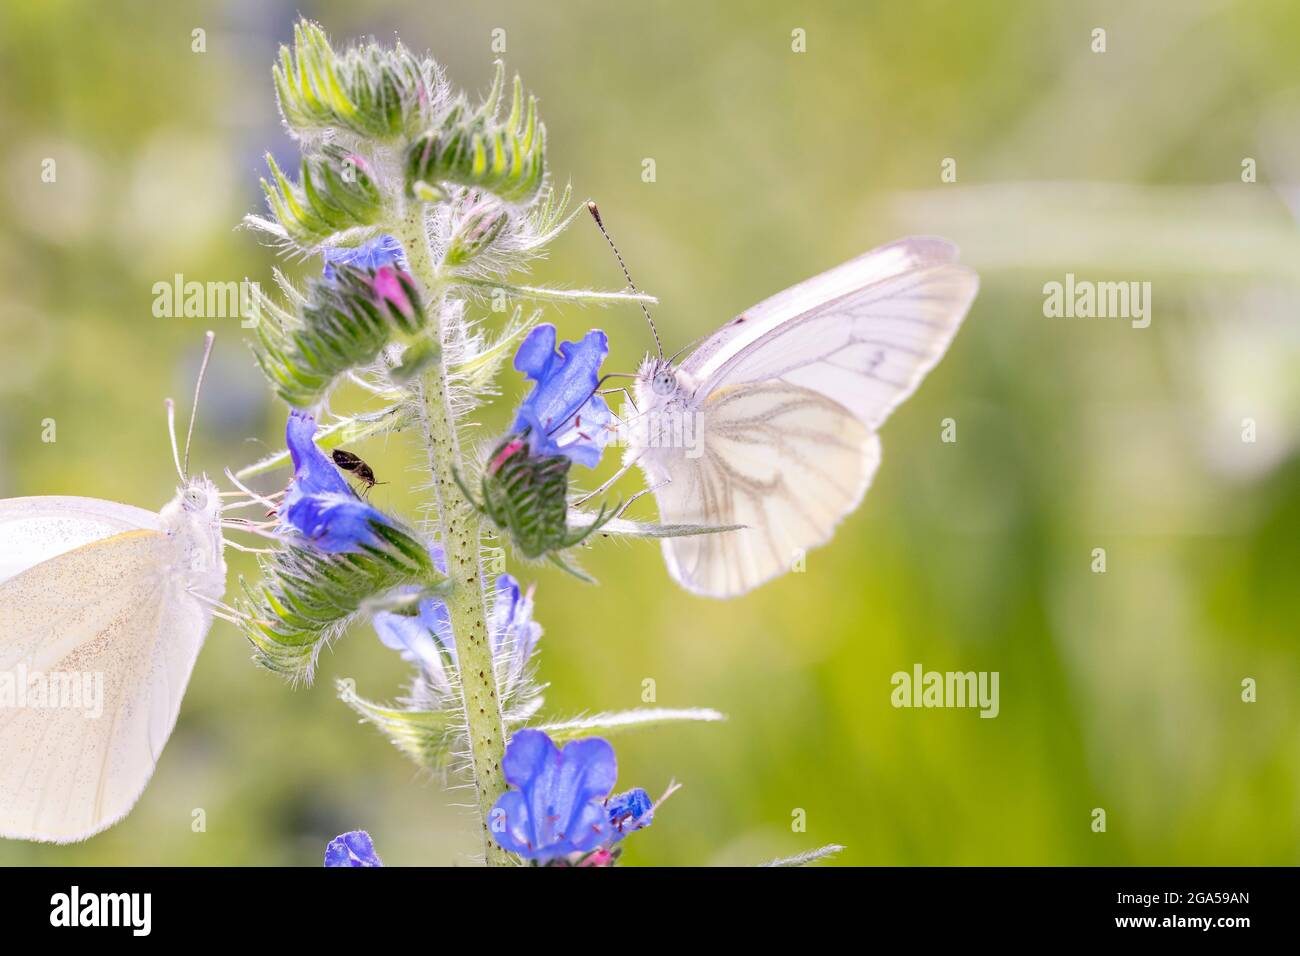 Green-veined white Butterfly - Pieris napi - resting on a blossom of viper's bugloss or blueweed - Echium vulgare Stock Photo